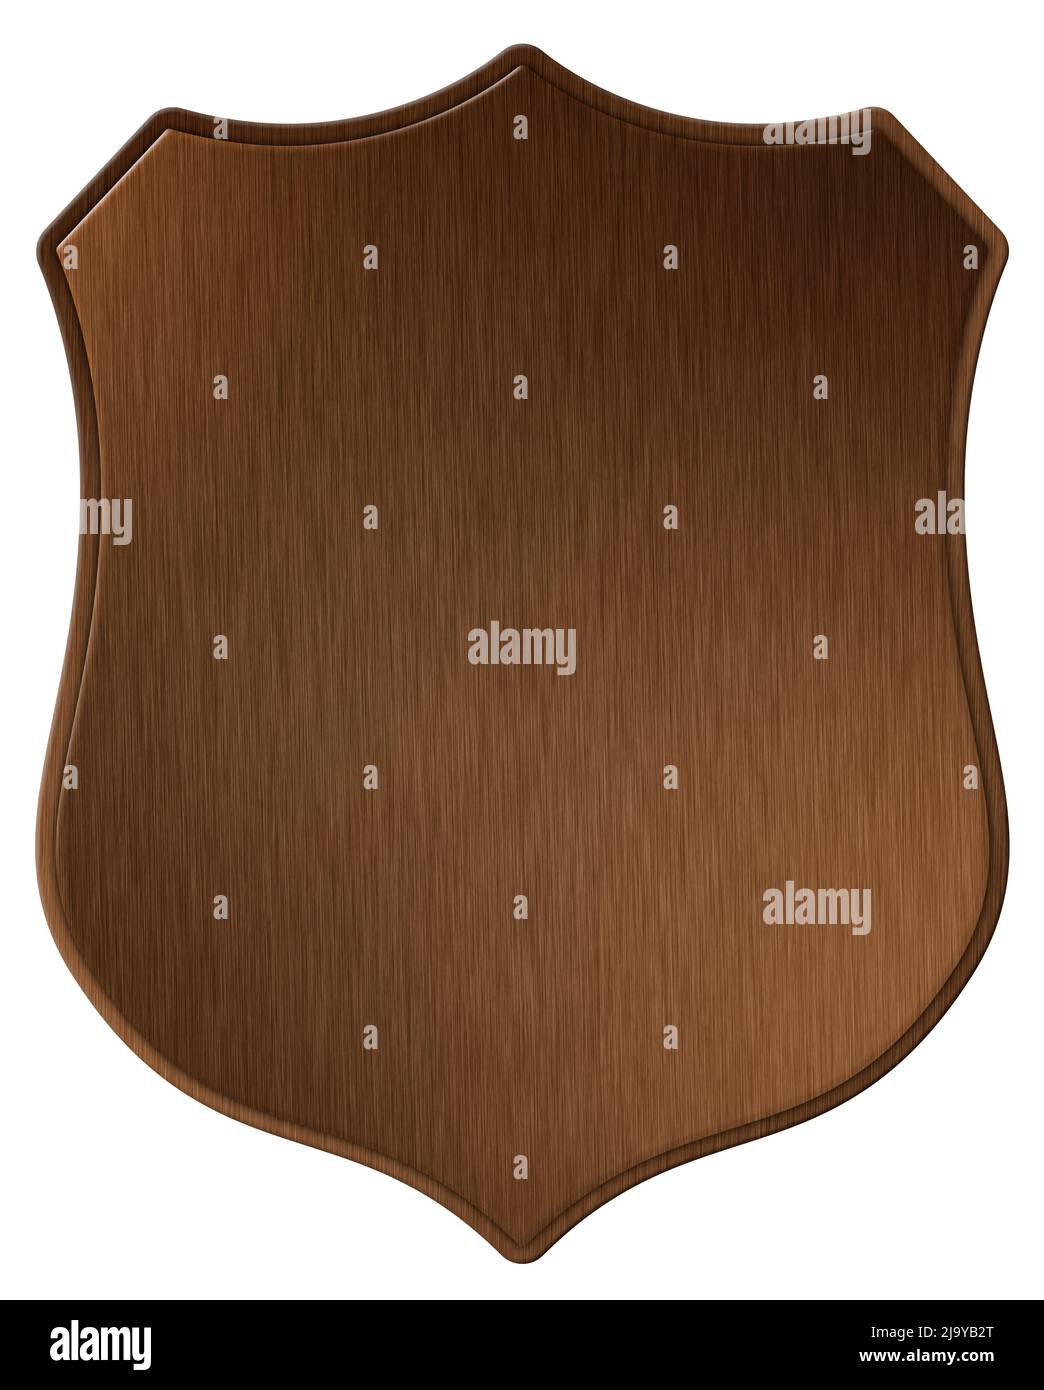 Crest or wooden base shield suitable to contain heraldic symbols or coats of arms, graphic illustration Stock Photo